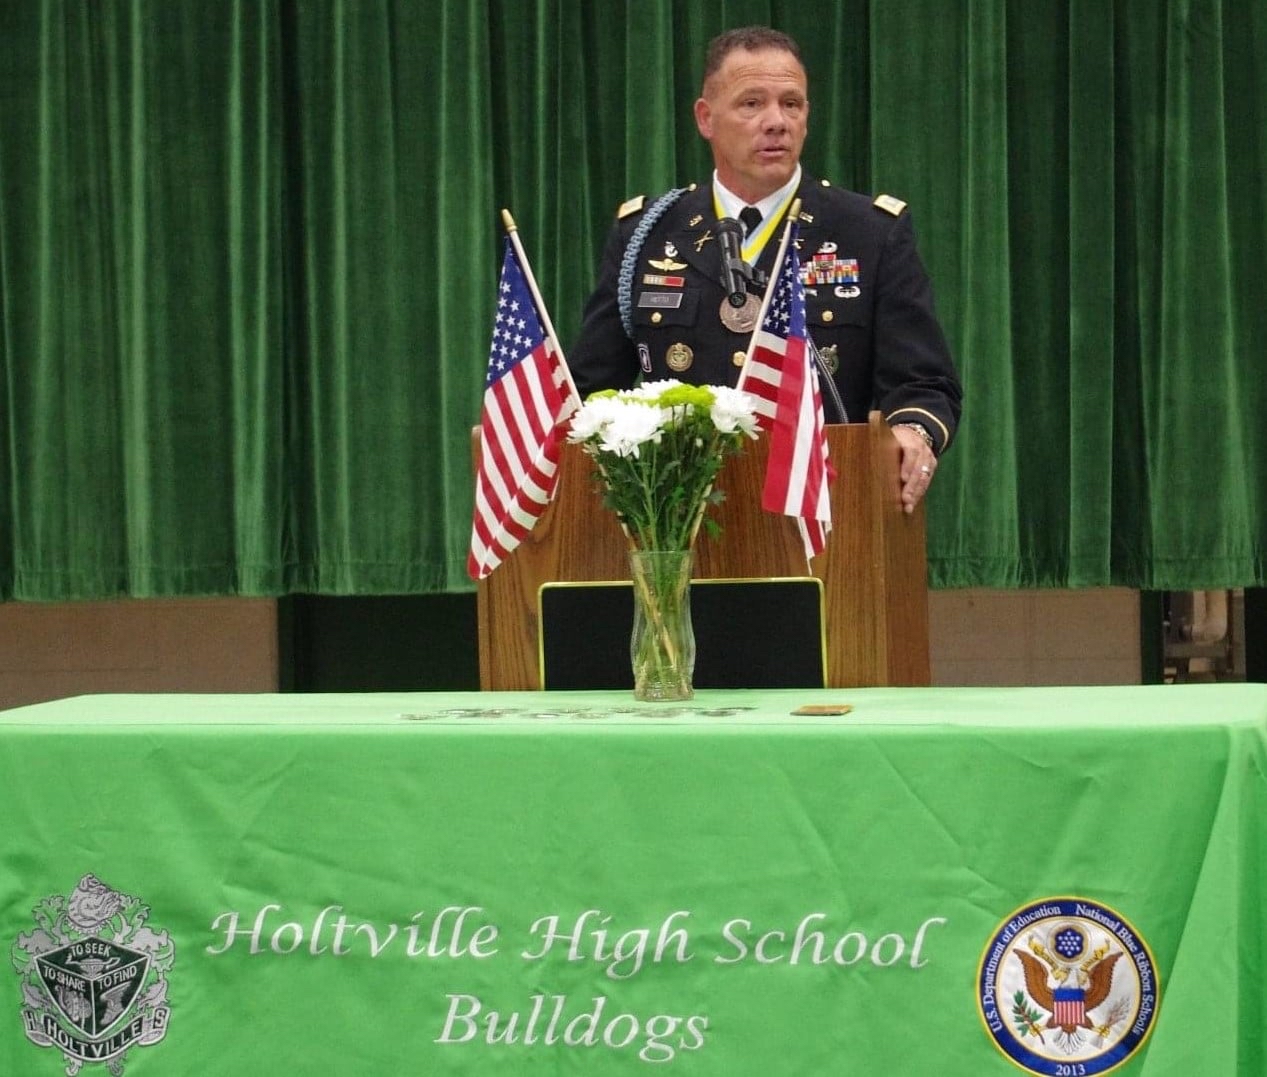 MAJ Hutto speaking at the Holtville High School Military Enlistment Celebration.  